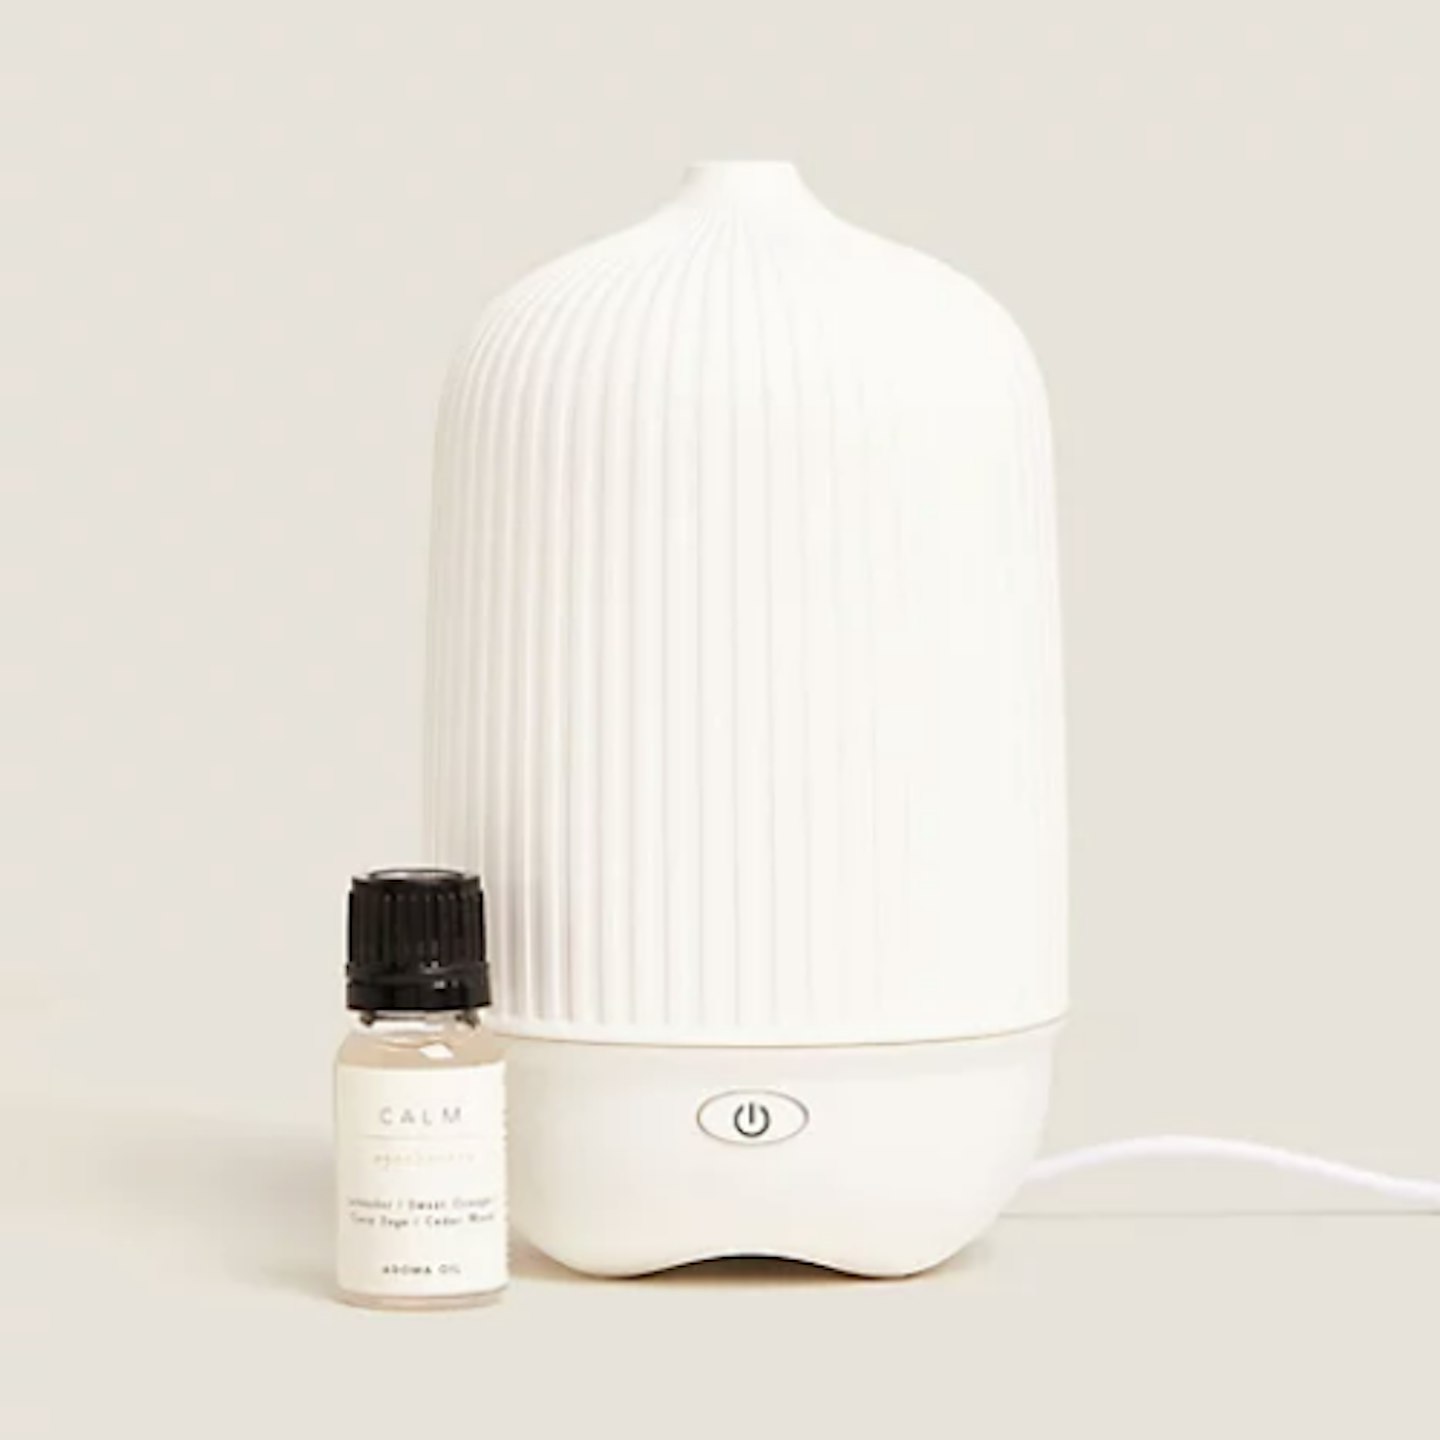 M&S Electric Diffuser Gift Set